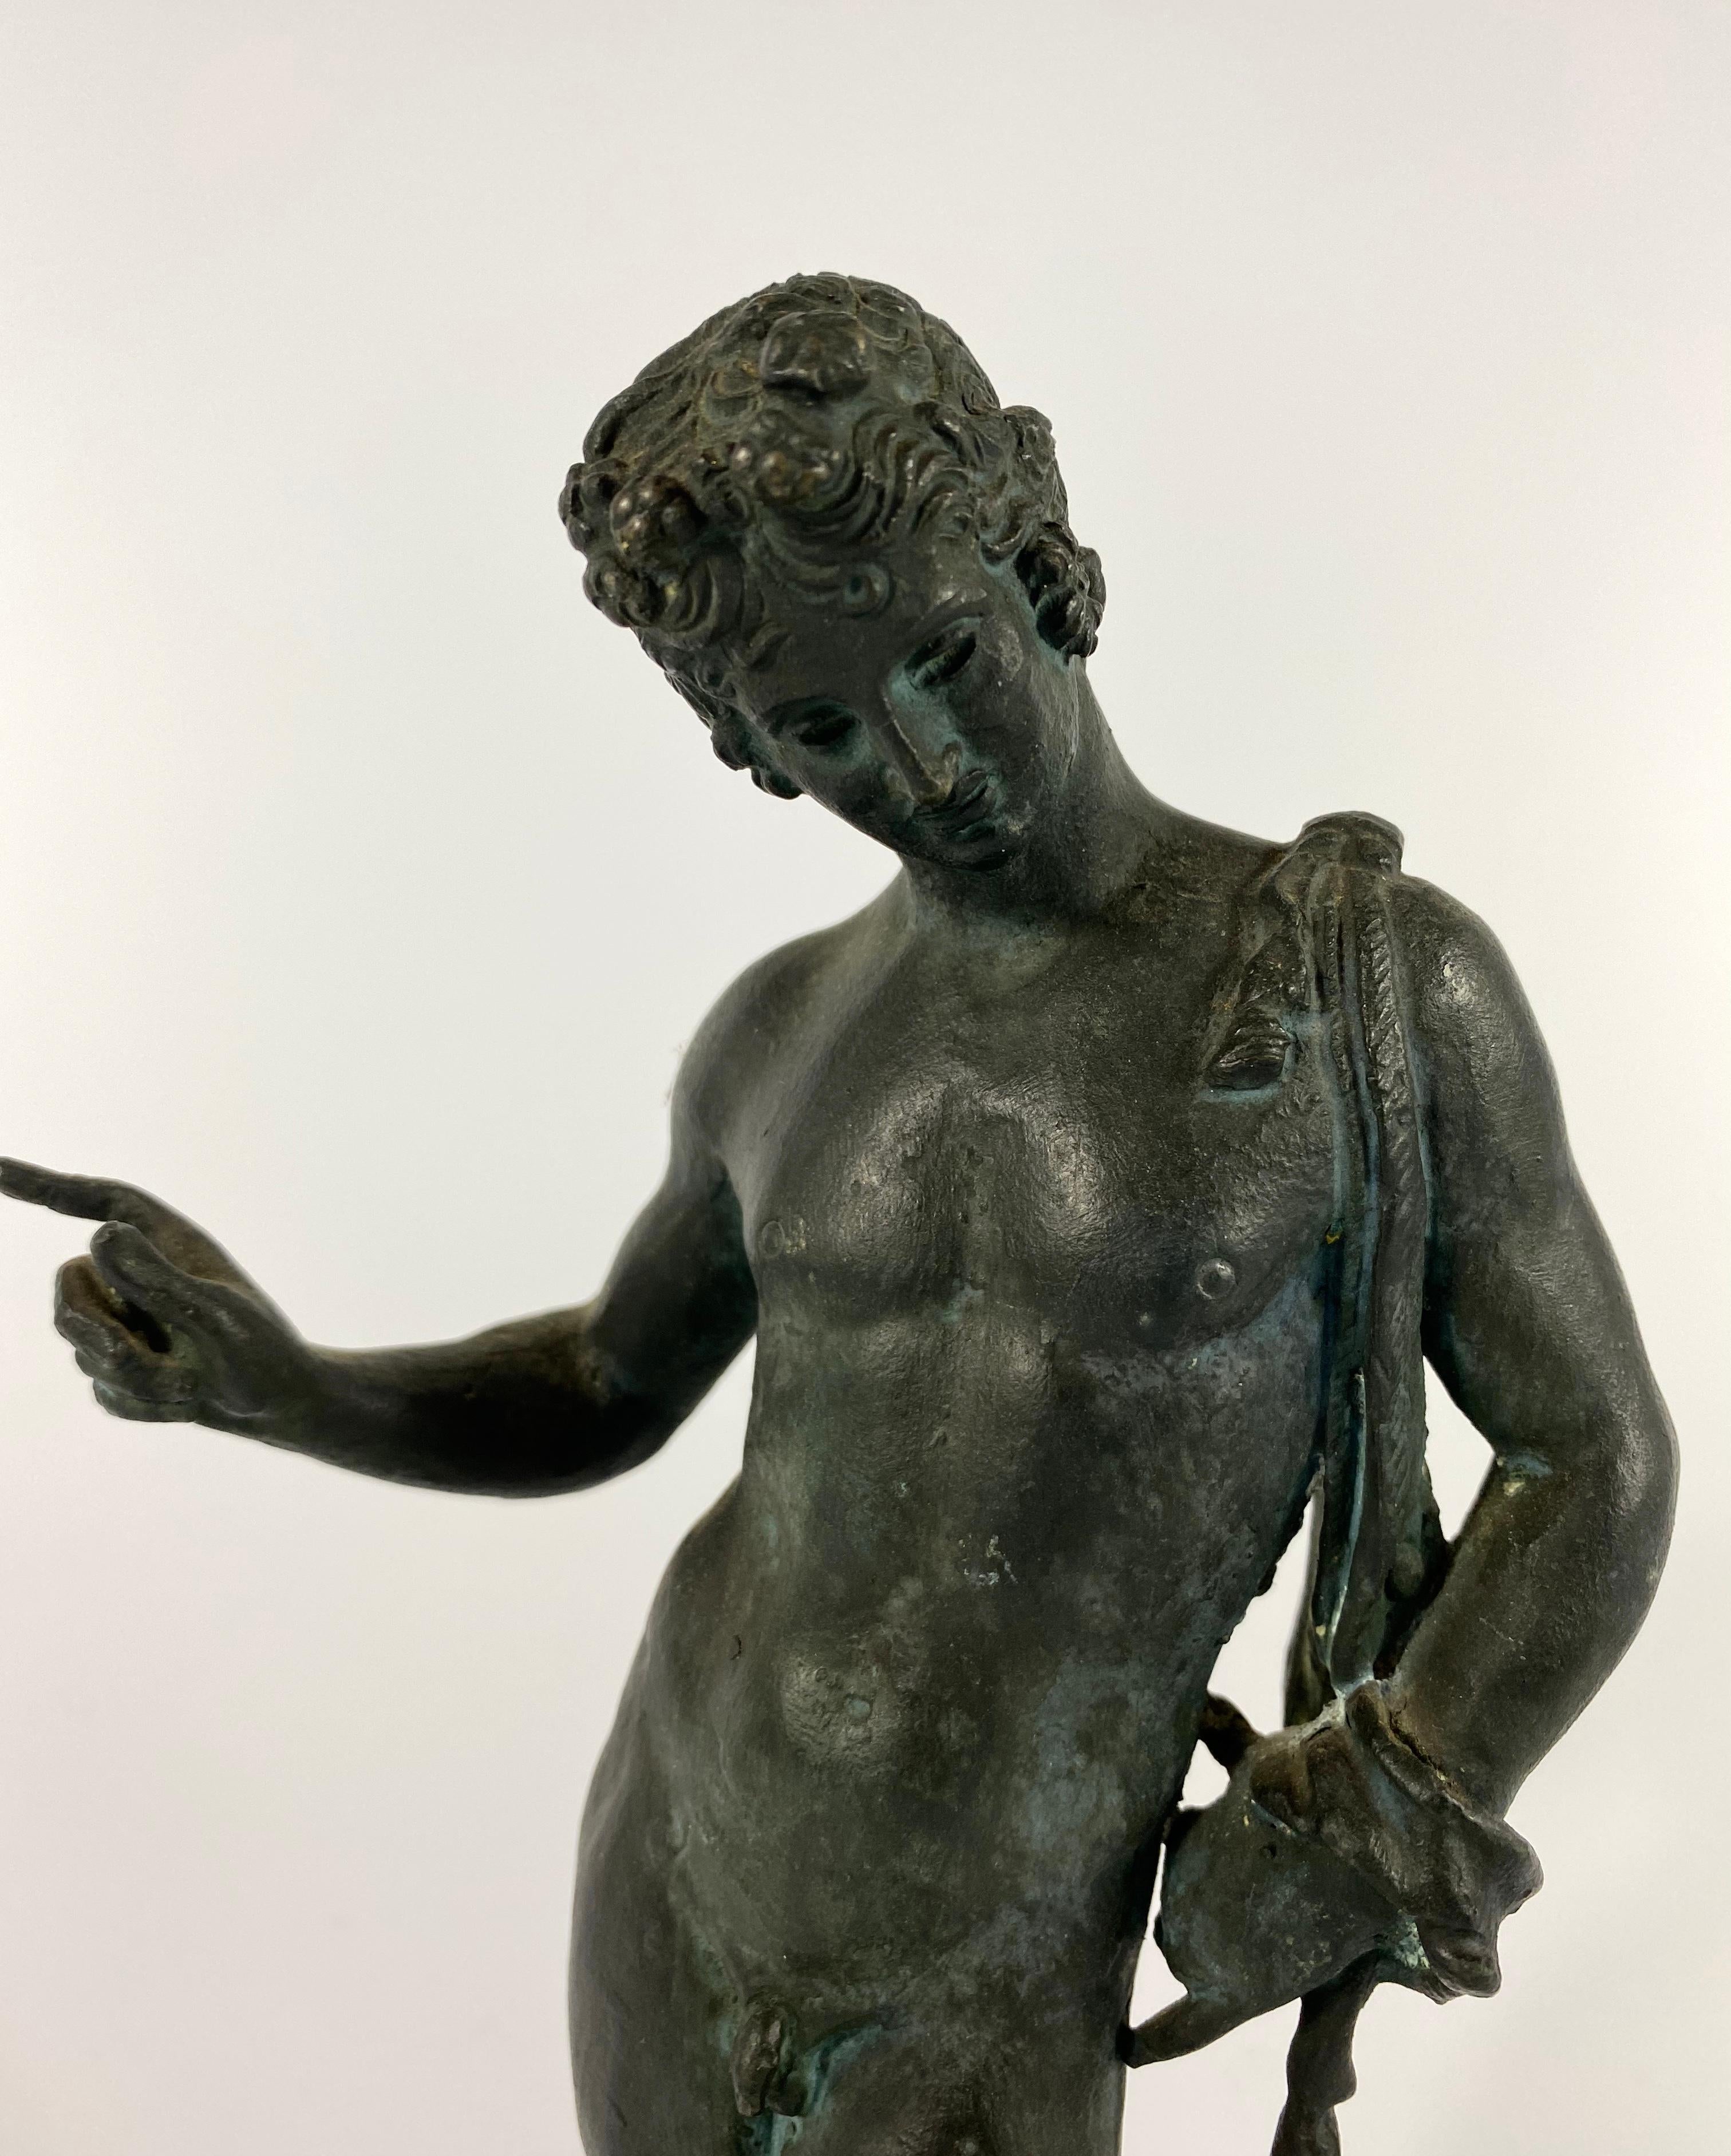 Italian ‘Grand Tour’ bronze figure of Narcissus, circa 1870. The naked youth captivated by his reflection in a pool of water. He wears a band of grape and vine, in his wavy hair, and a goat skin over his shoulder.
Set upon a circular base, cast